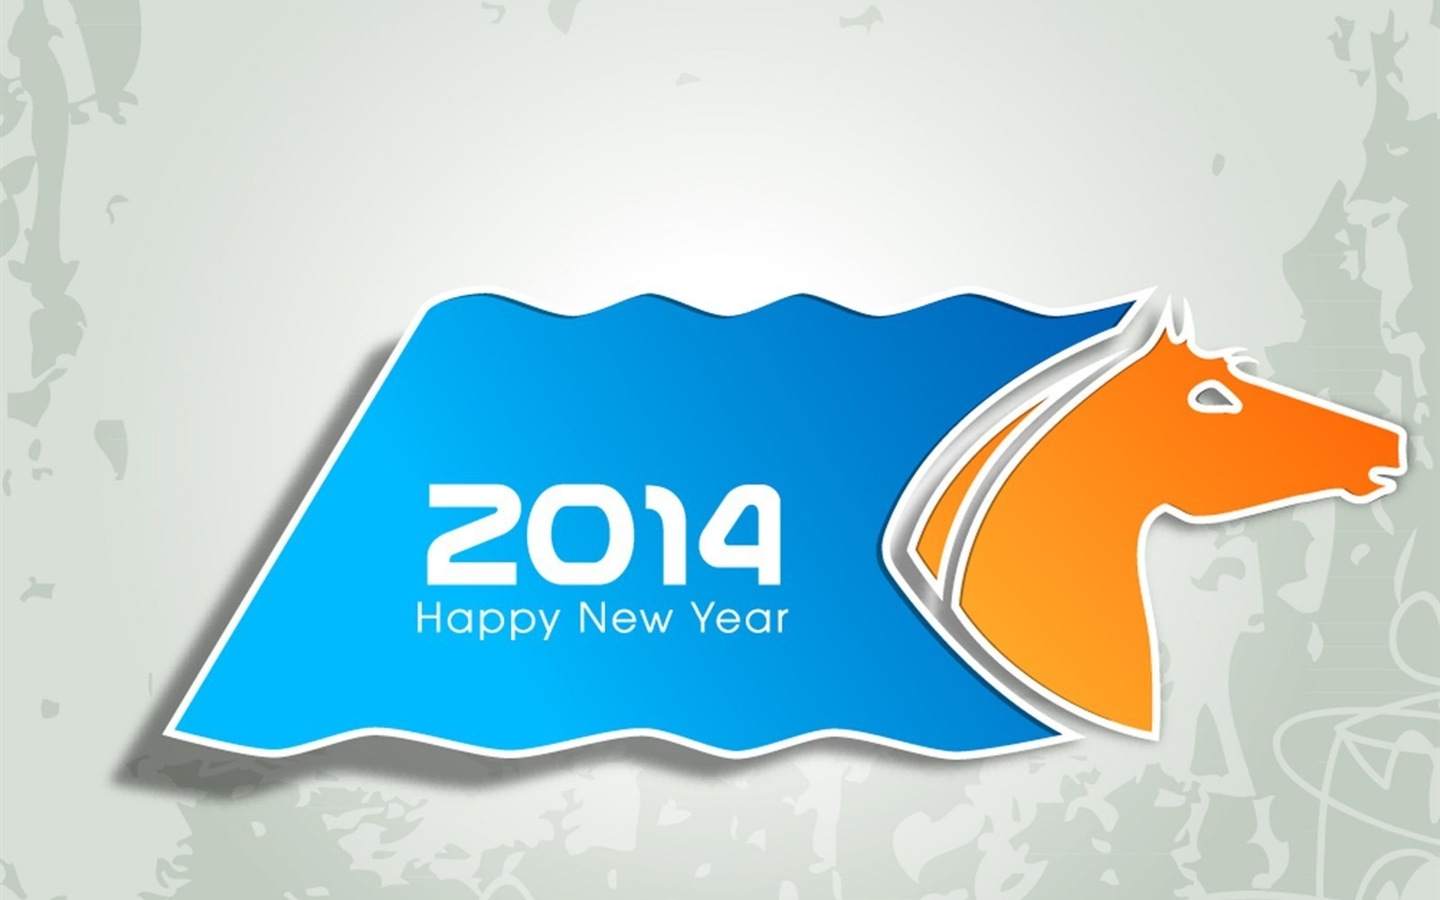 2014 New Year Theme HD Wallpapers (1) #10 - 1440x900